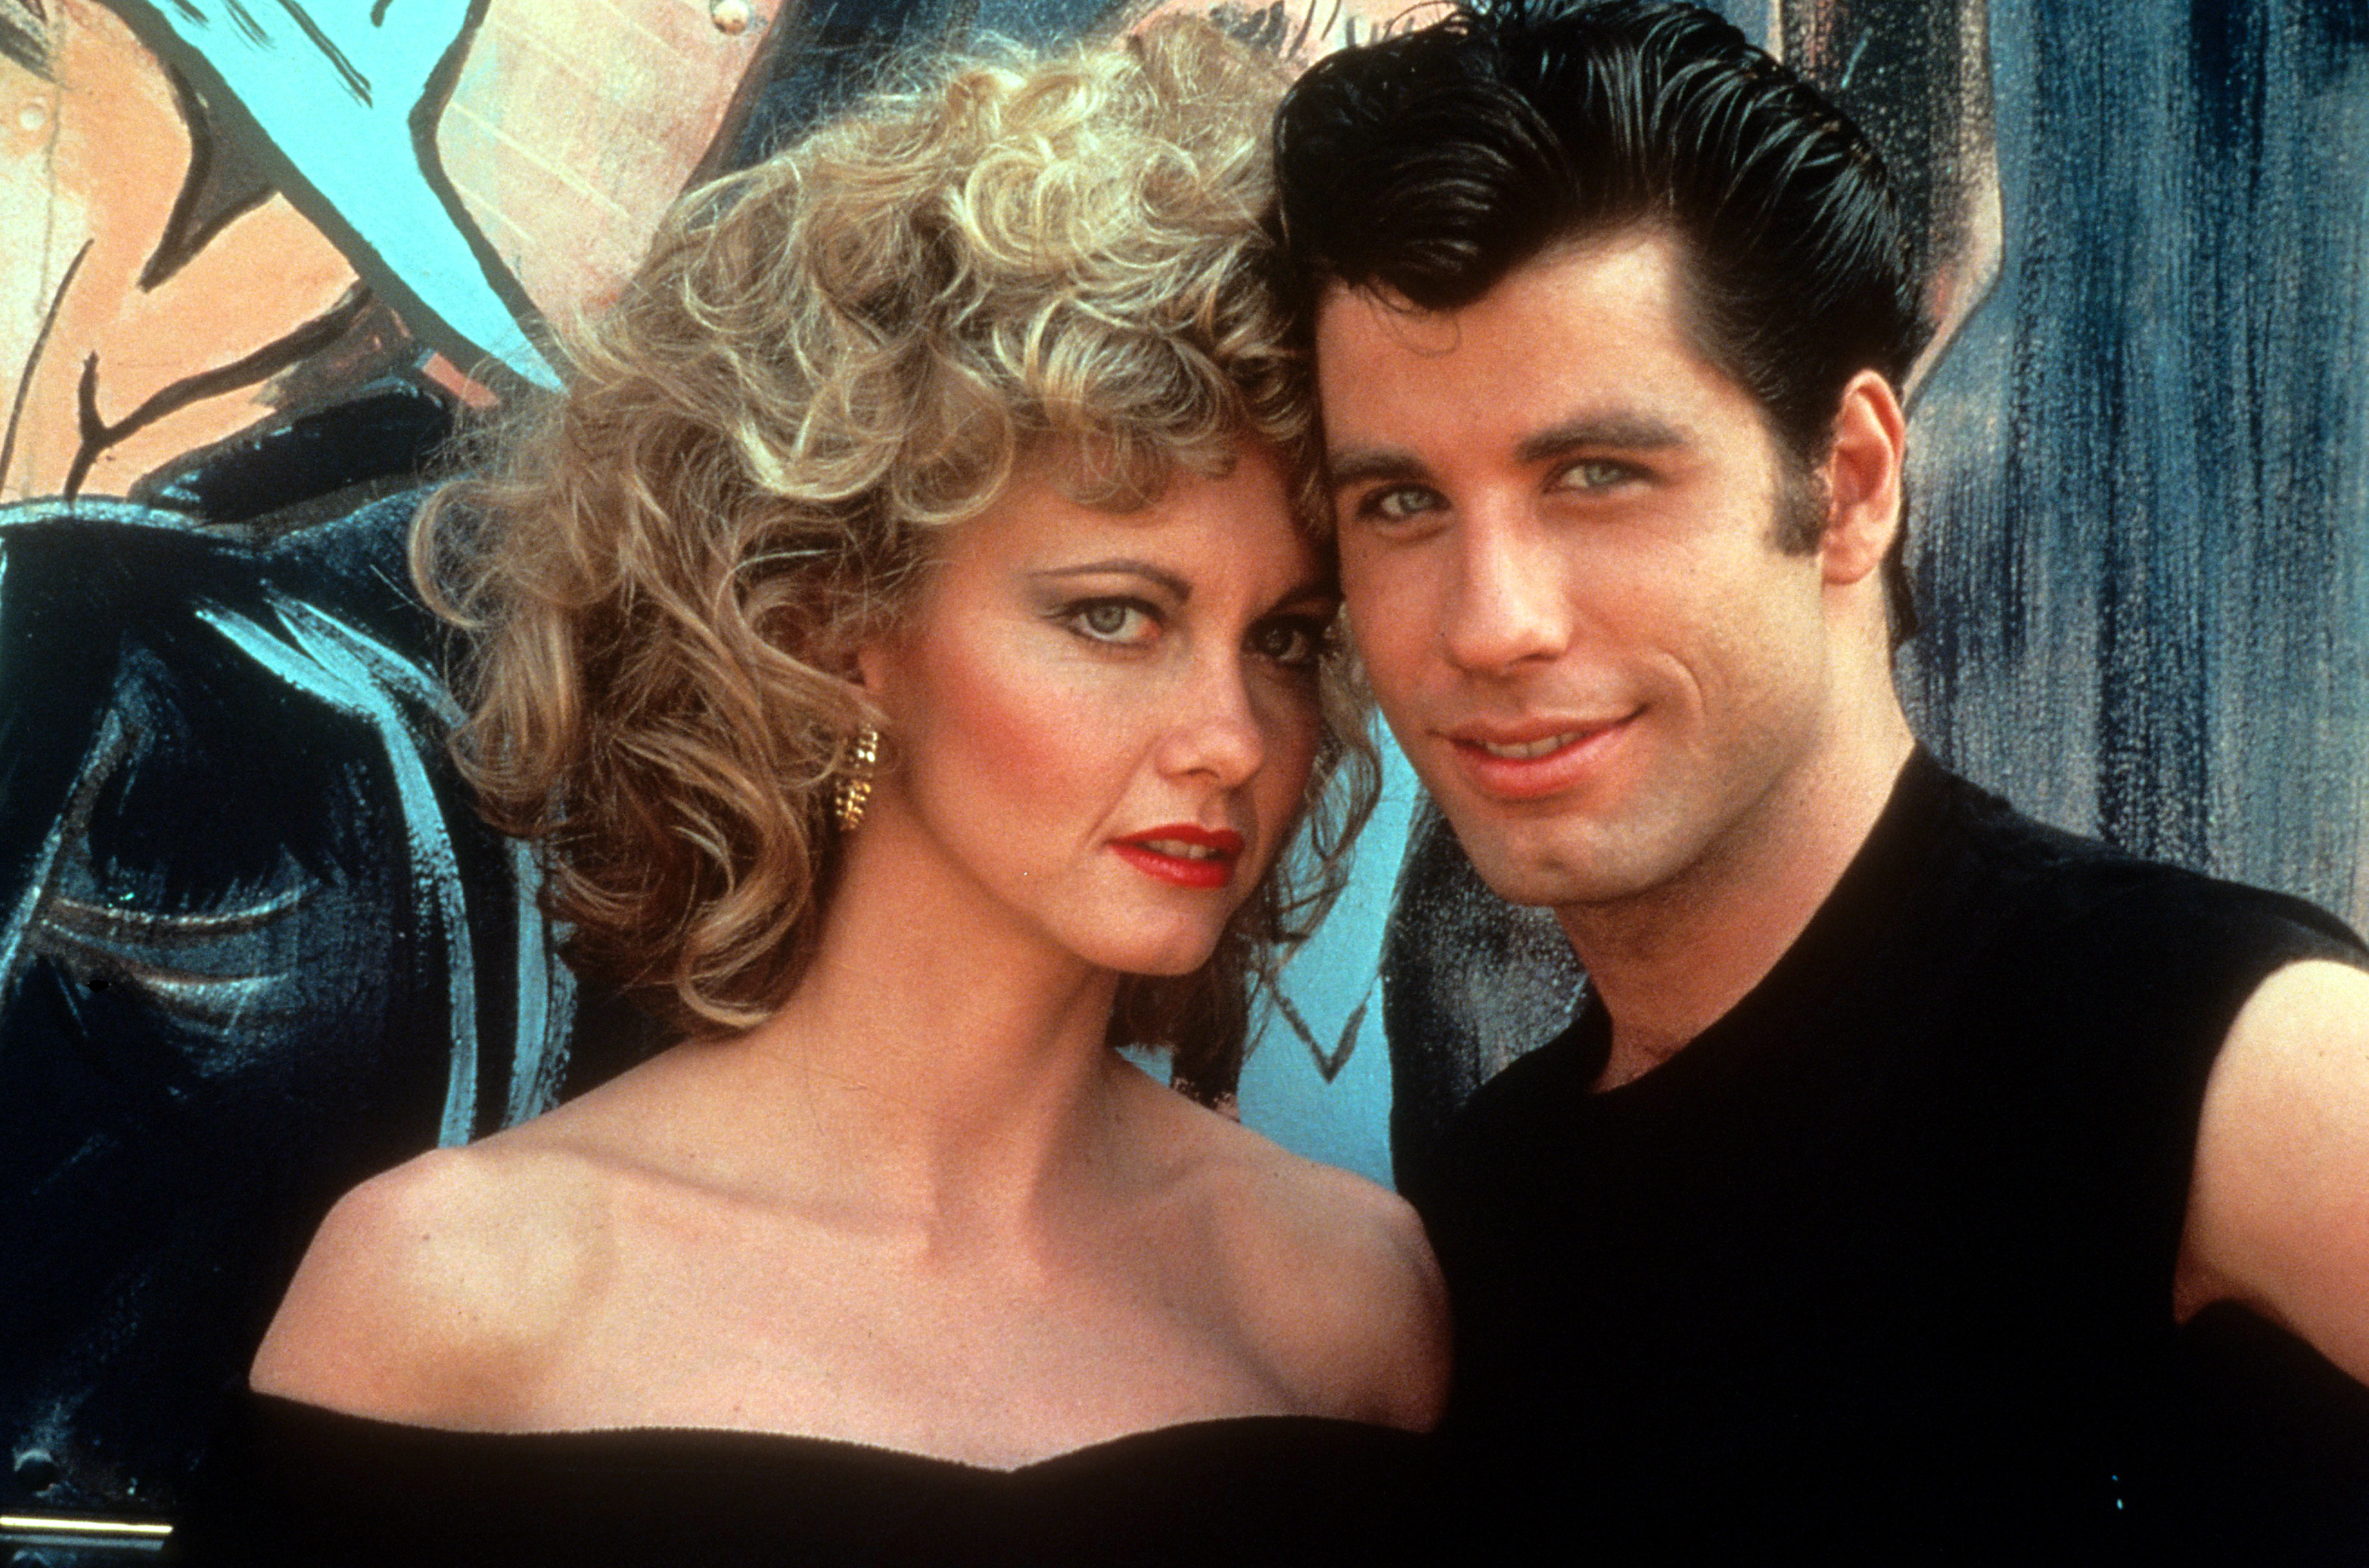 Things You Never Knew About The Movie 'Grease' - The Delite